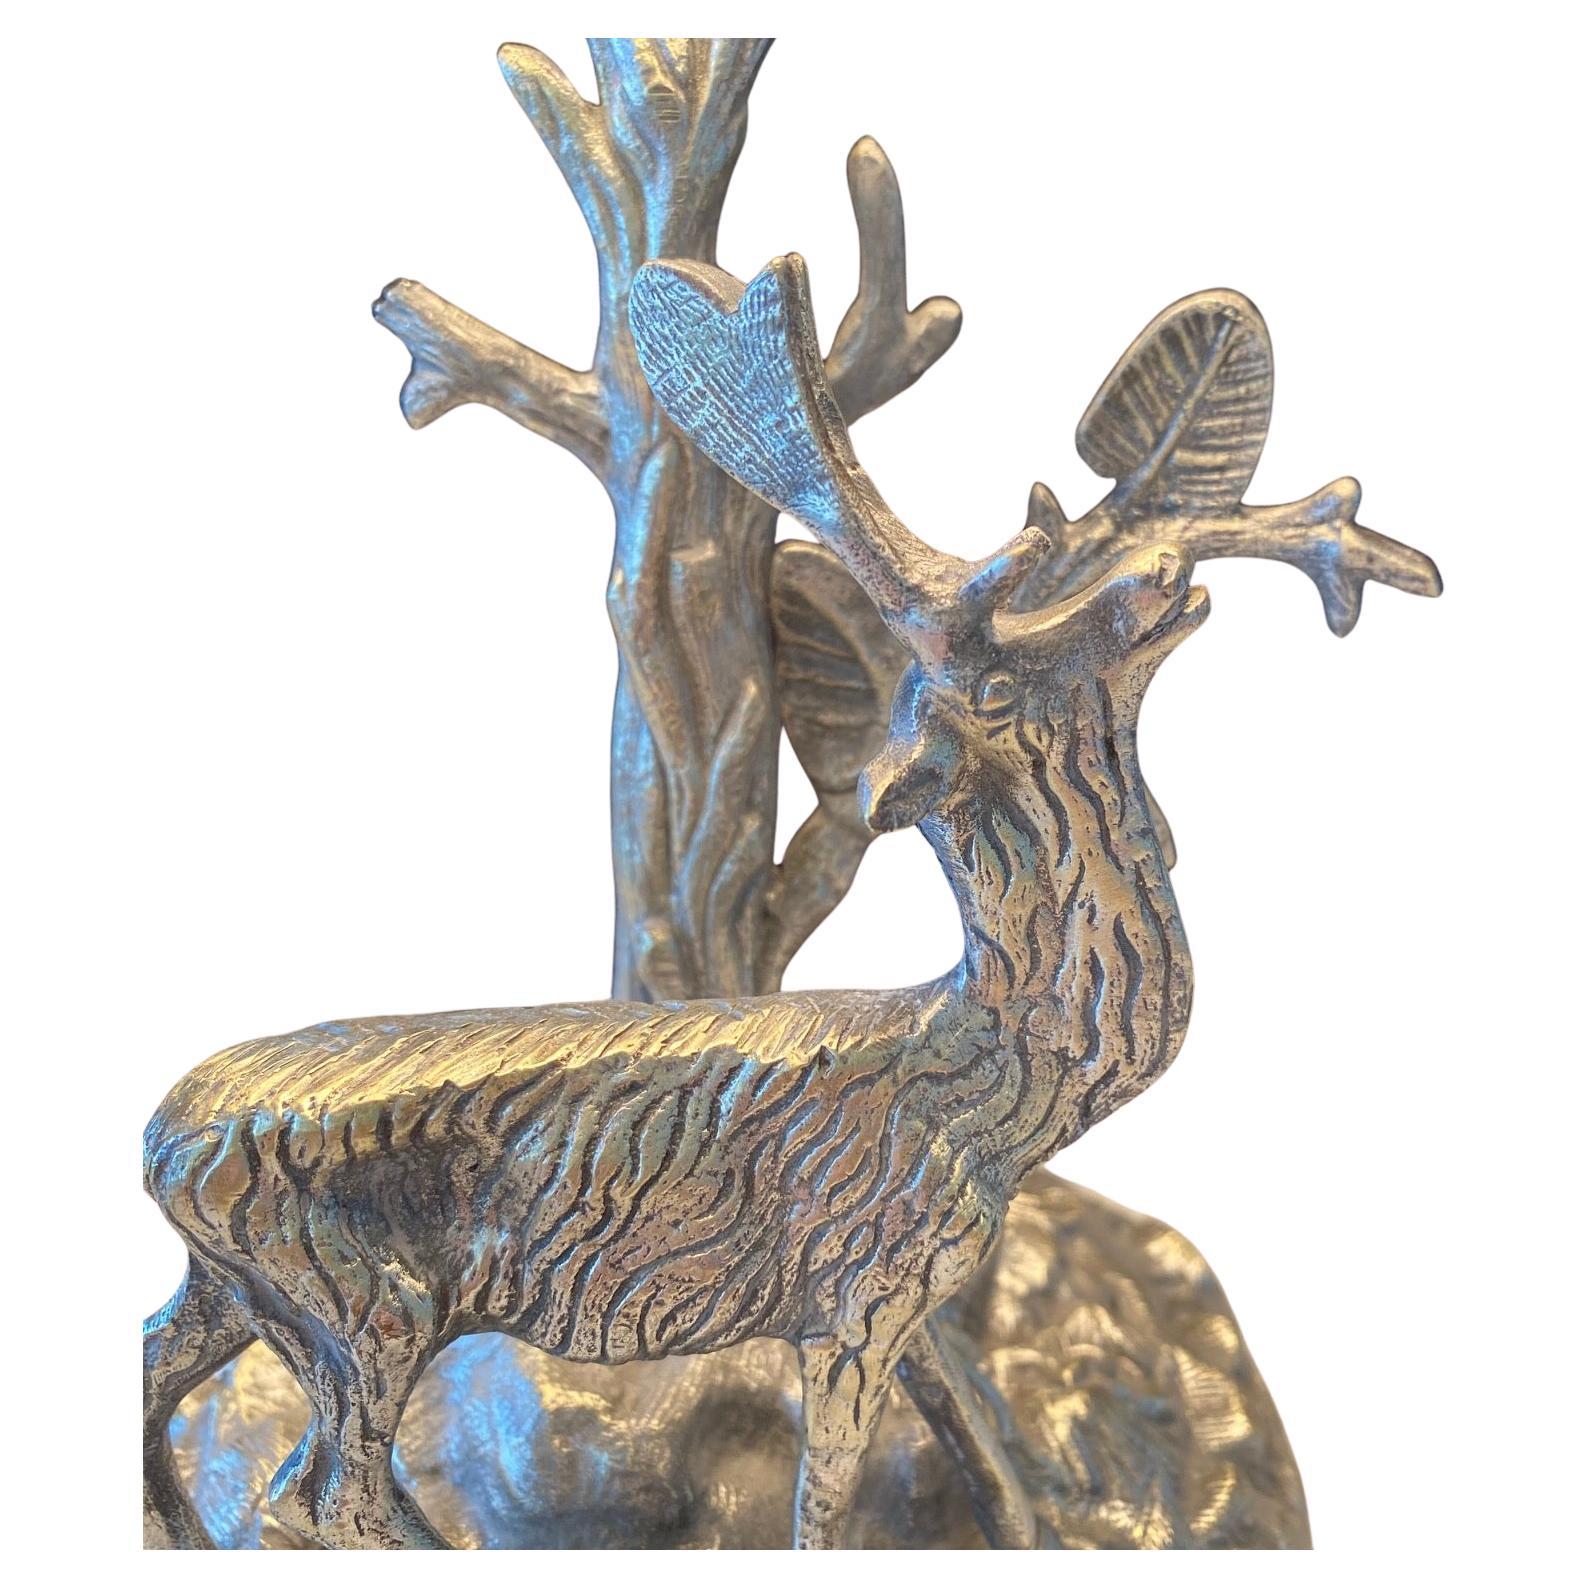 Valenti style stag table lamp, unsigned. Fine midcentury quality solid silvered plate on bronze sculpture most likely by the highly sought after Spanish artist Valenti. This sculpture depicts a wild stag under a beautifully sculpted tree with leaves